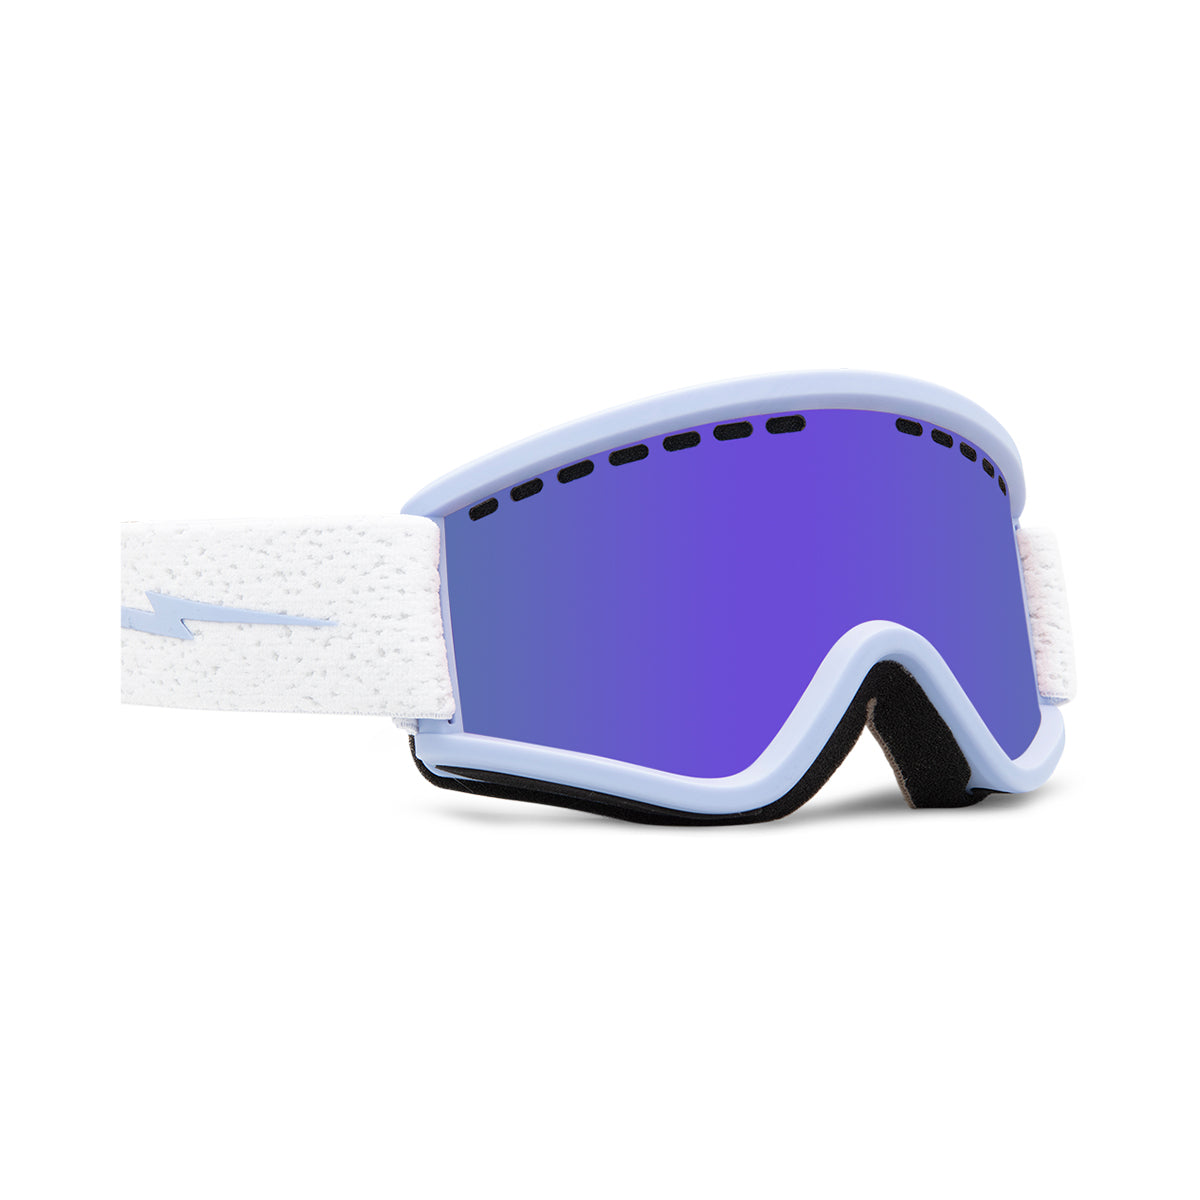 ELECTRIC EGV.K YOUTH SNOWBOARD GOGGLES - ORCHID SPECKLE